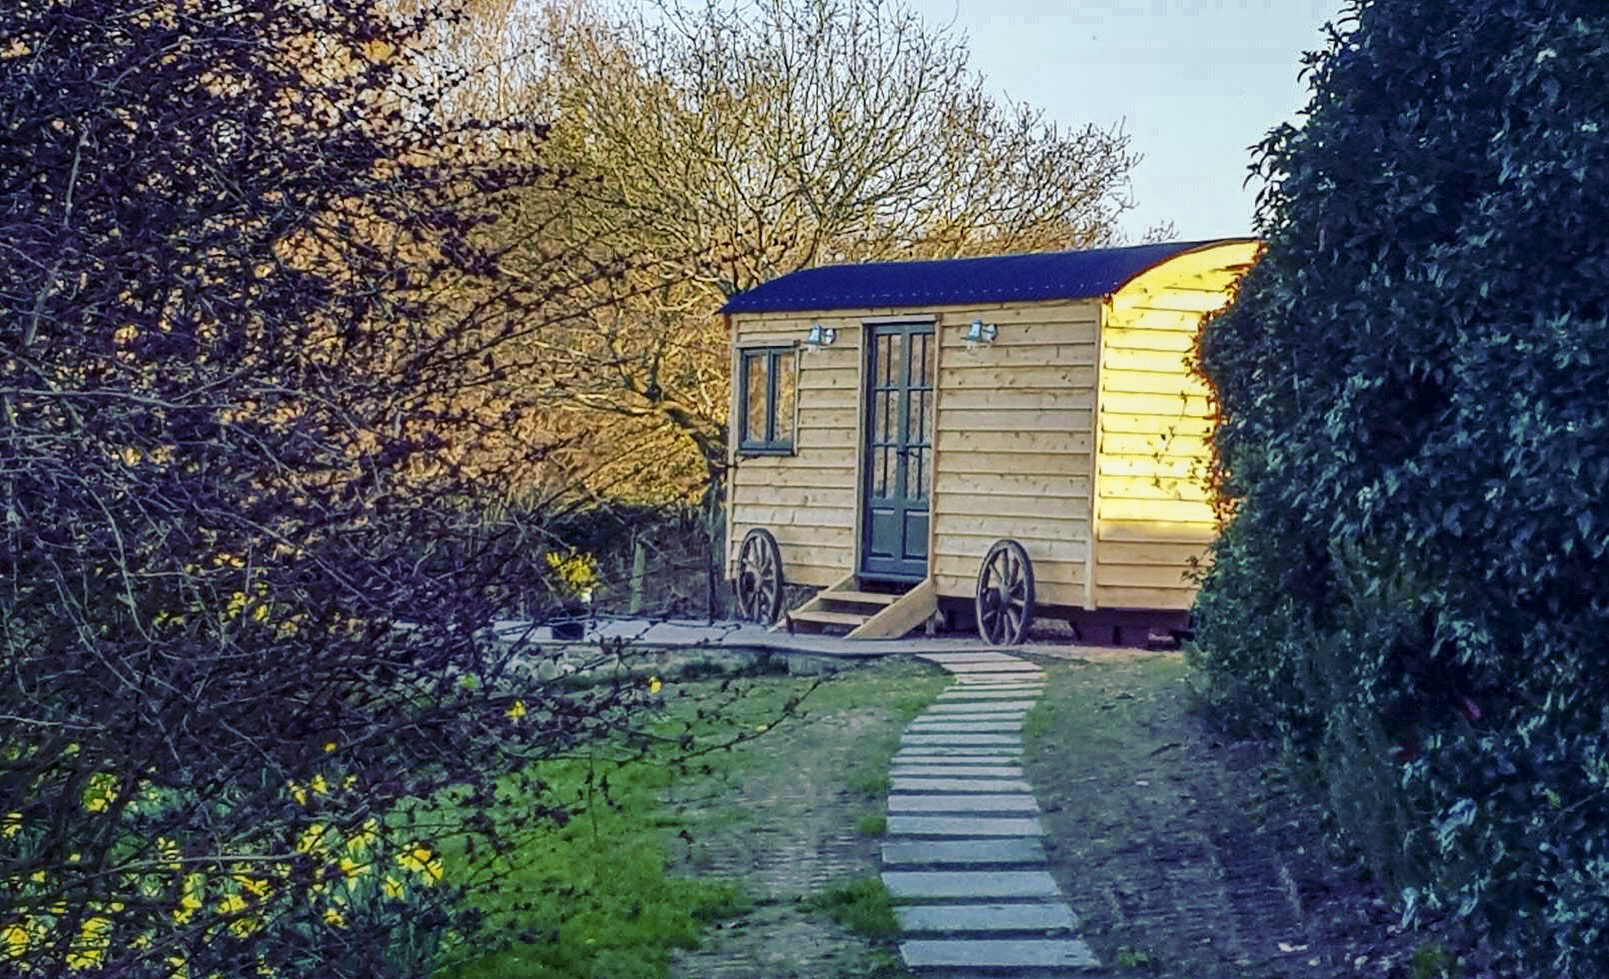 Shepherds View - Huts for Rent in Popes Hill, England, United Kingdom